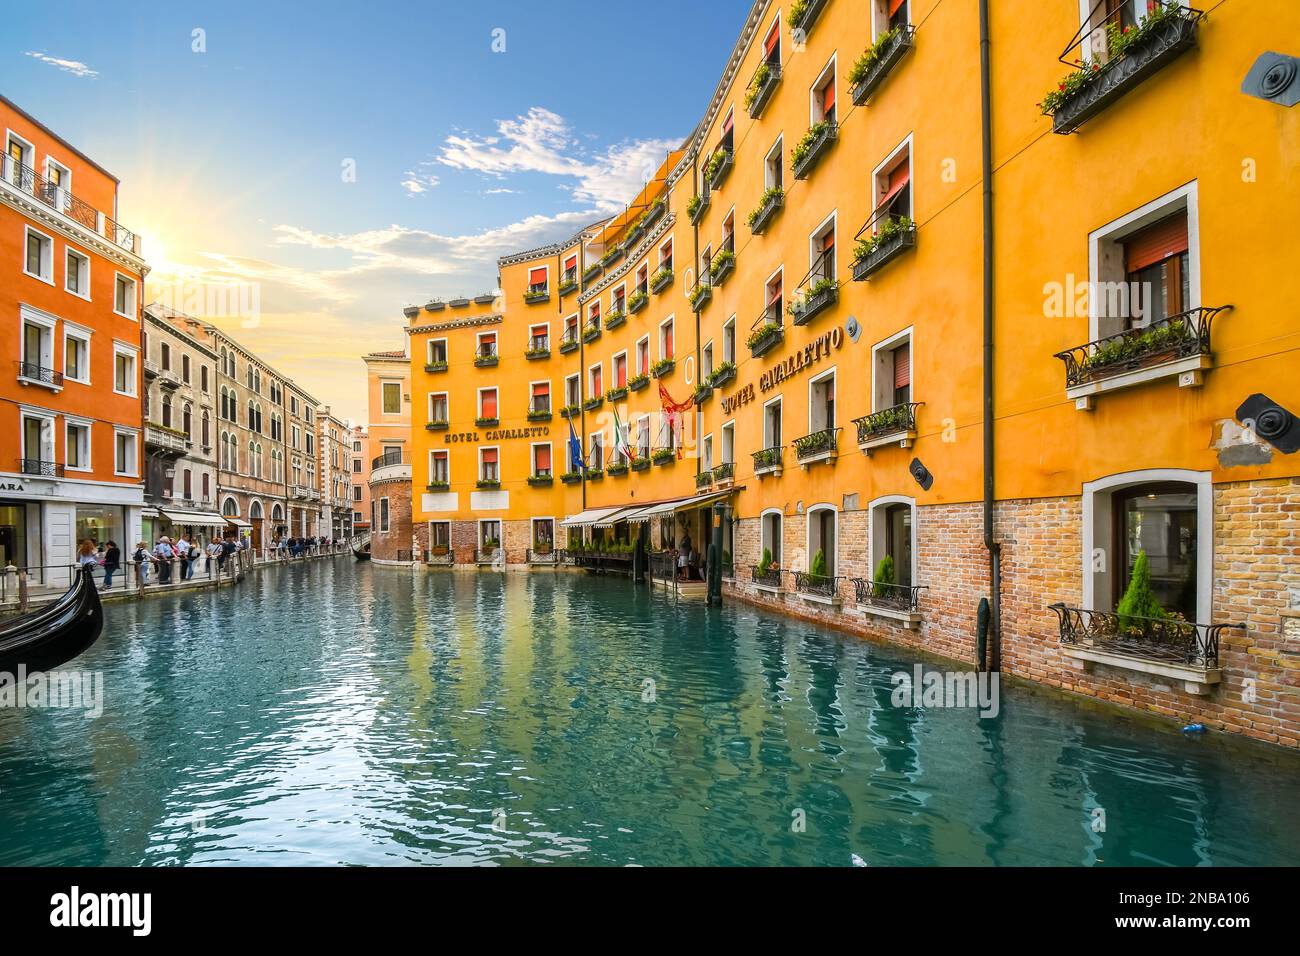 The Orseolo Basin, location of a gondola station, in front of a luxury hotel as tourists enjoy a late afternoon in Venice, Italy Stock Photo